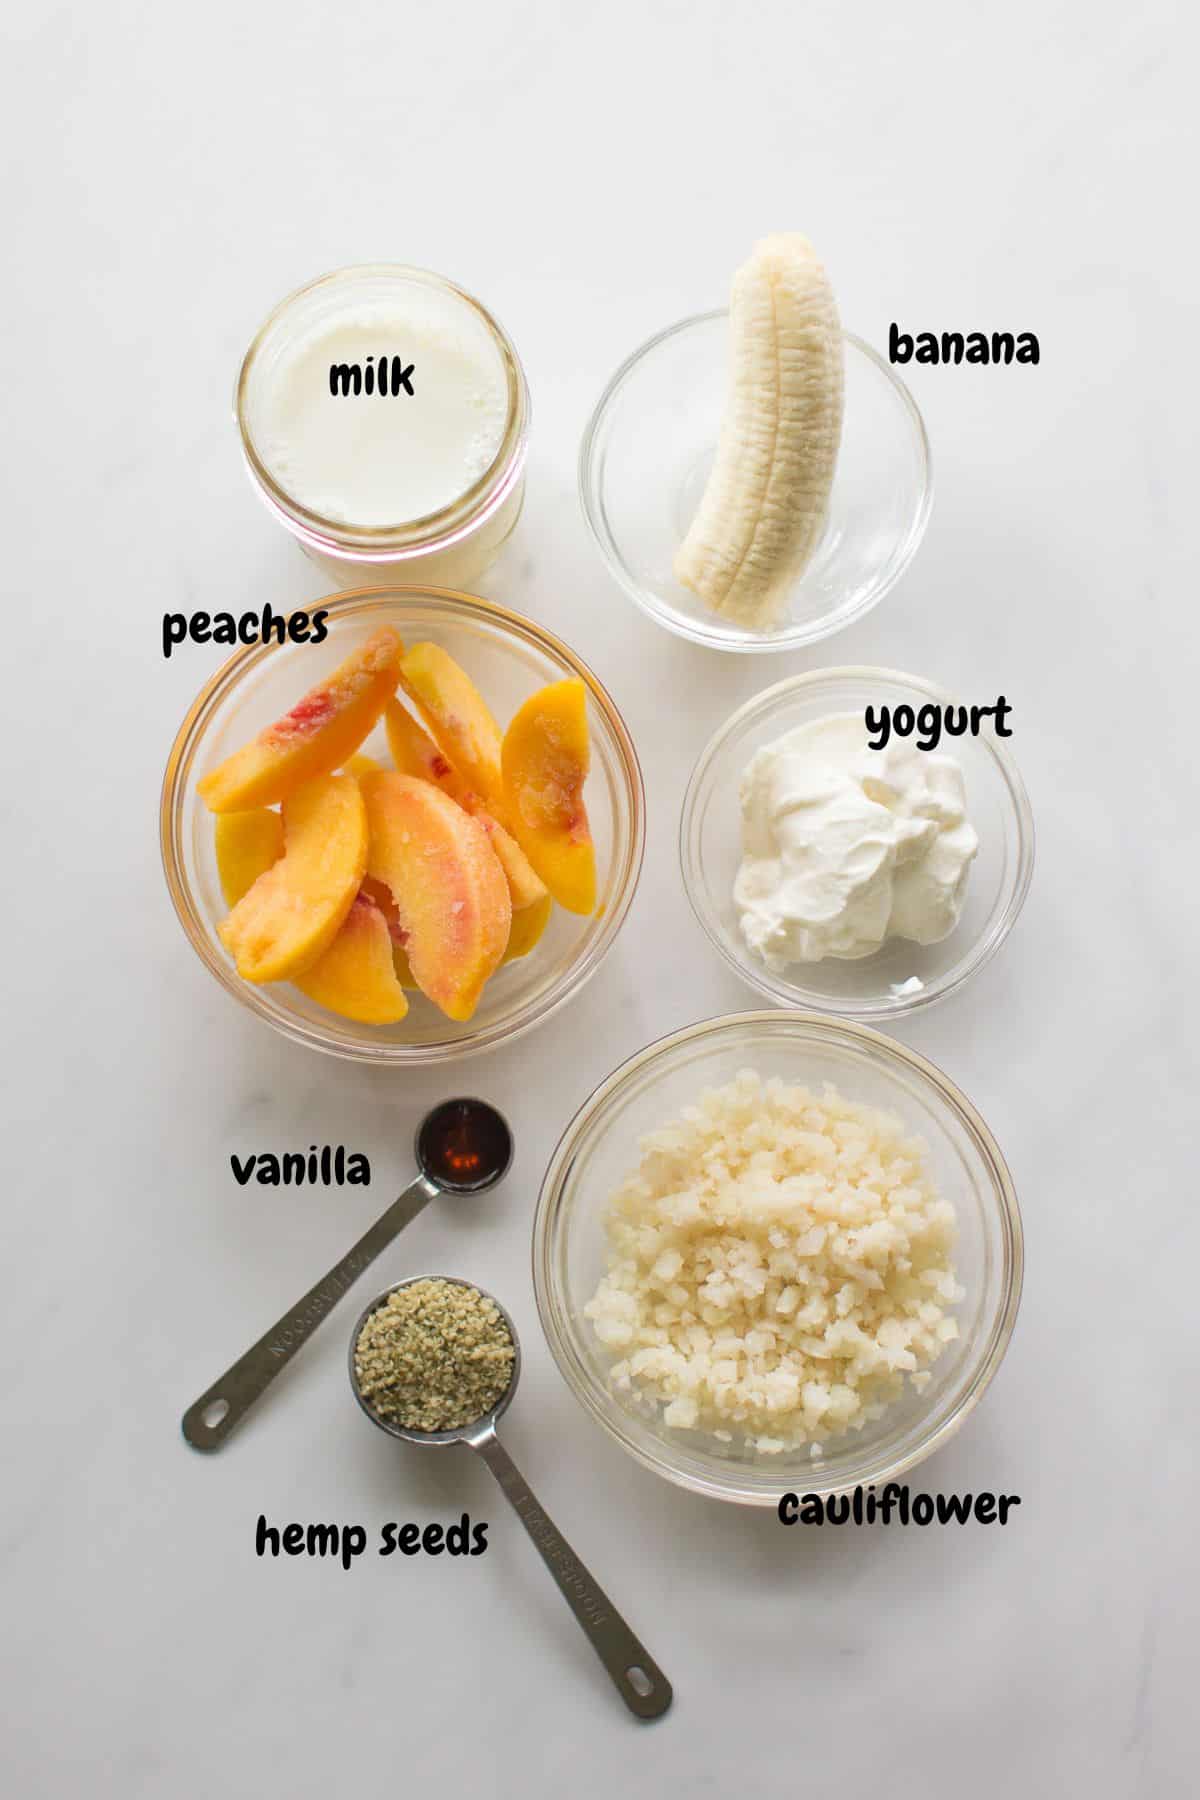 all the ingredients laid out on a white background.